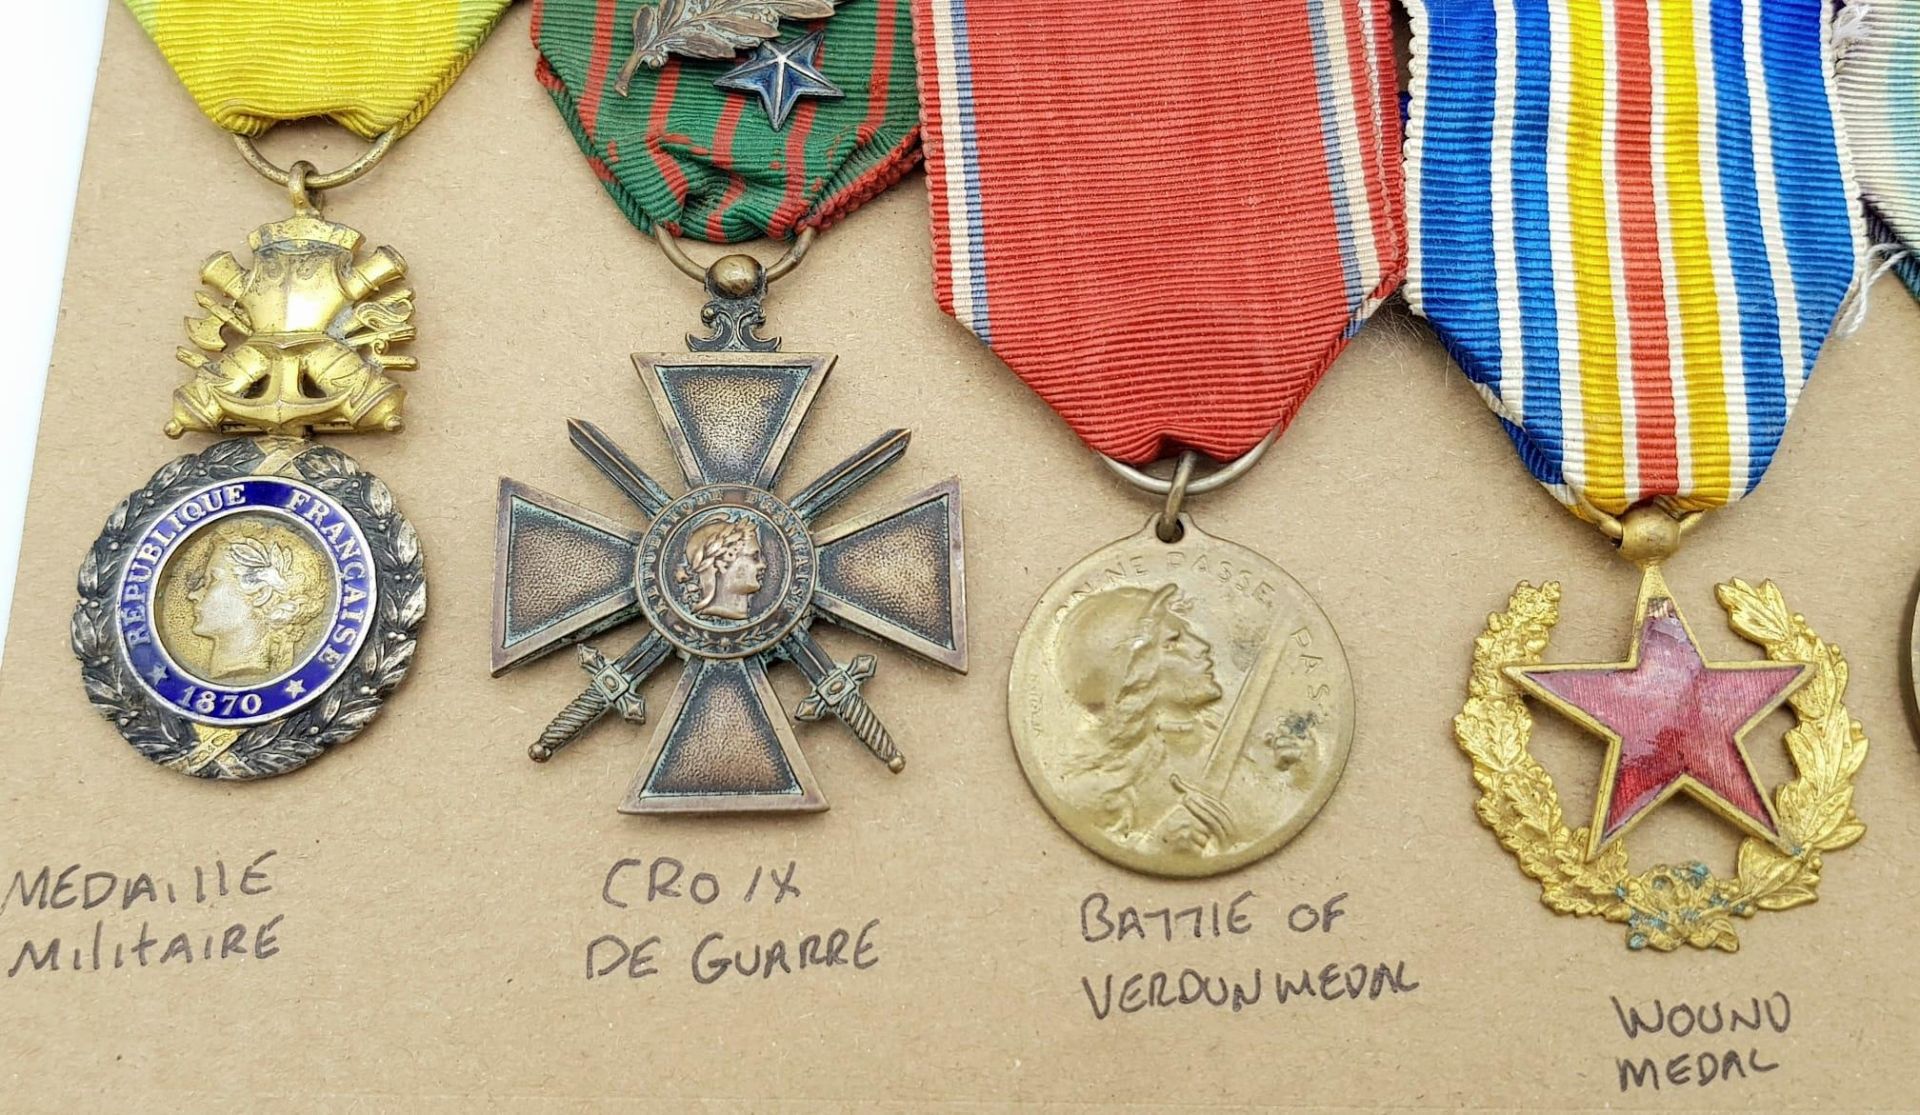 WW1 Military Medal Group awarded to a French soldier for his actions above and beyond the call of - Image 3 of 5